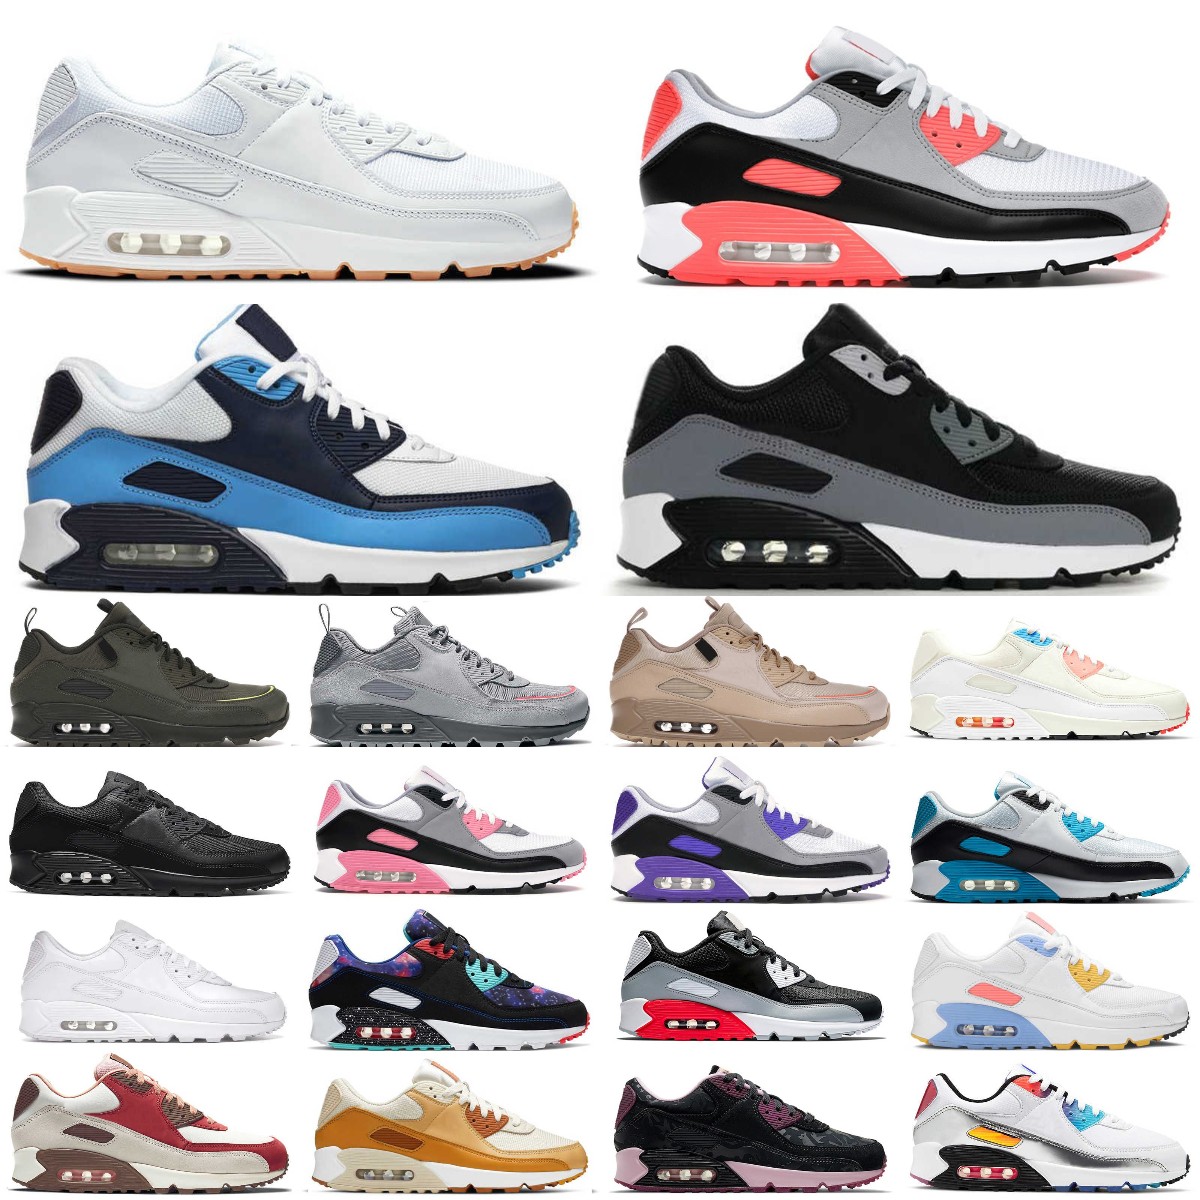 Classic 90s Running Shoes Men Sneakers Triple White GS Black Leather Mesh Gym Red Cny Avancable Mujeres Sports Trainer Surfion Cushion Surfaz Eur 36-45